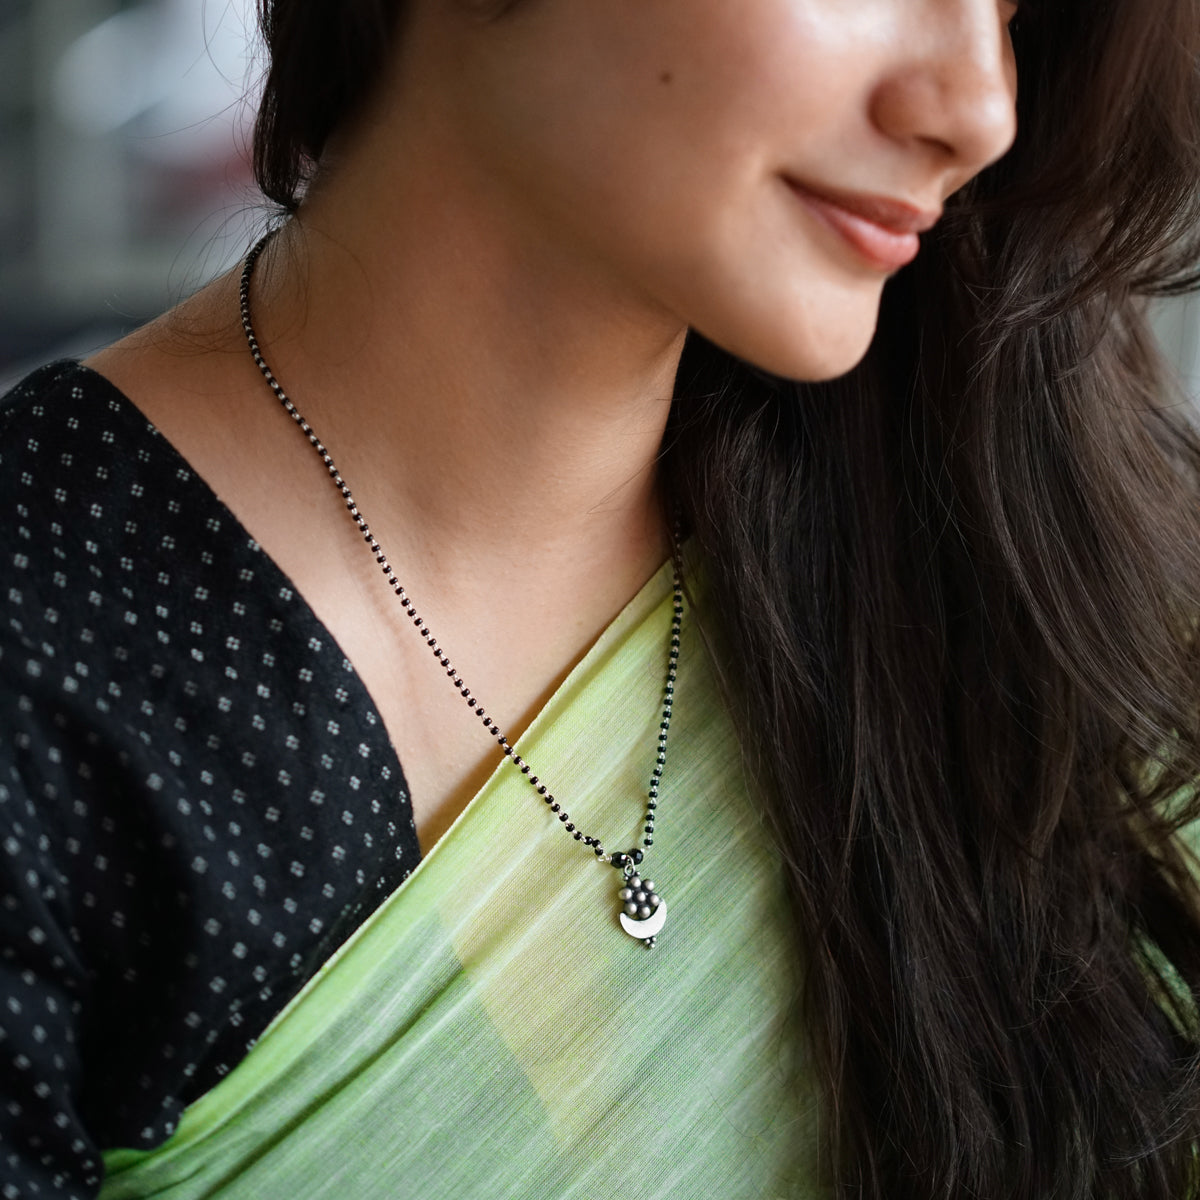 a woman wearing a green sari and a necklace